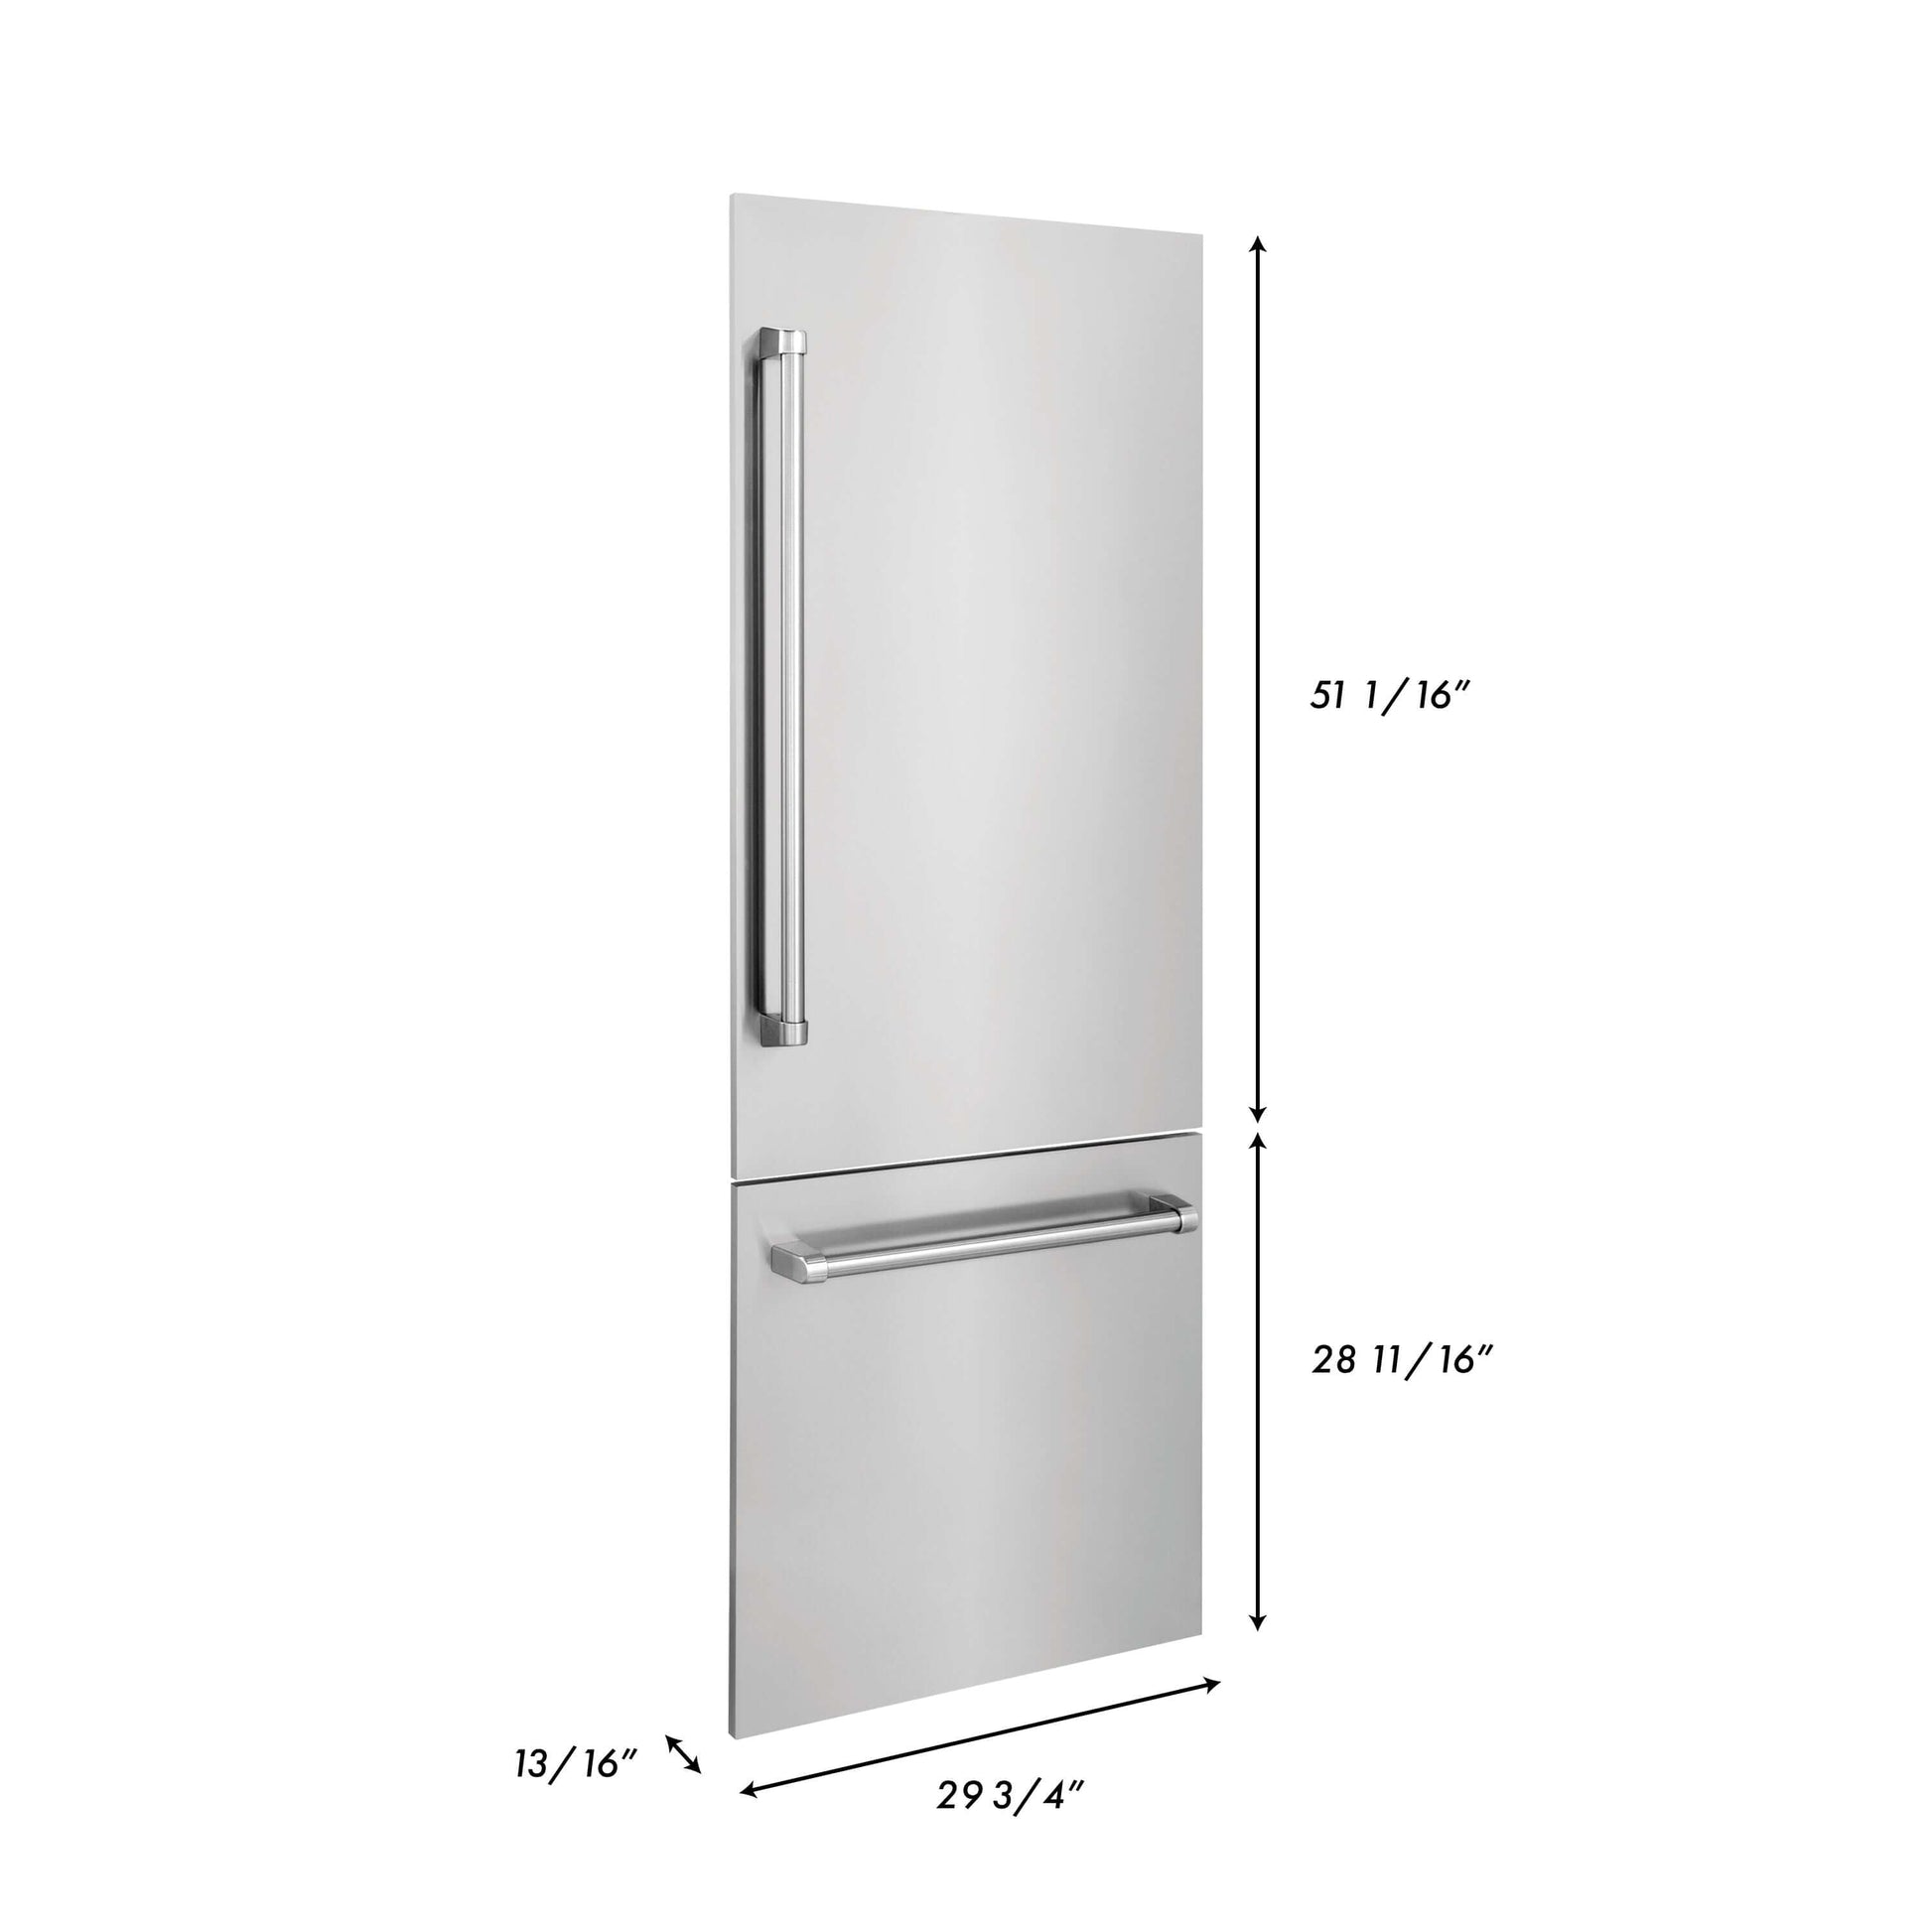 Panels & Handles Only - ZLINE 30" Refrigerator Panels in Stainless Steel